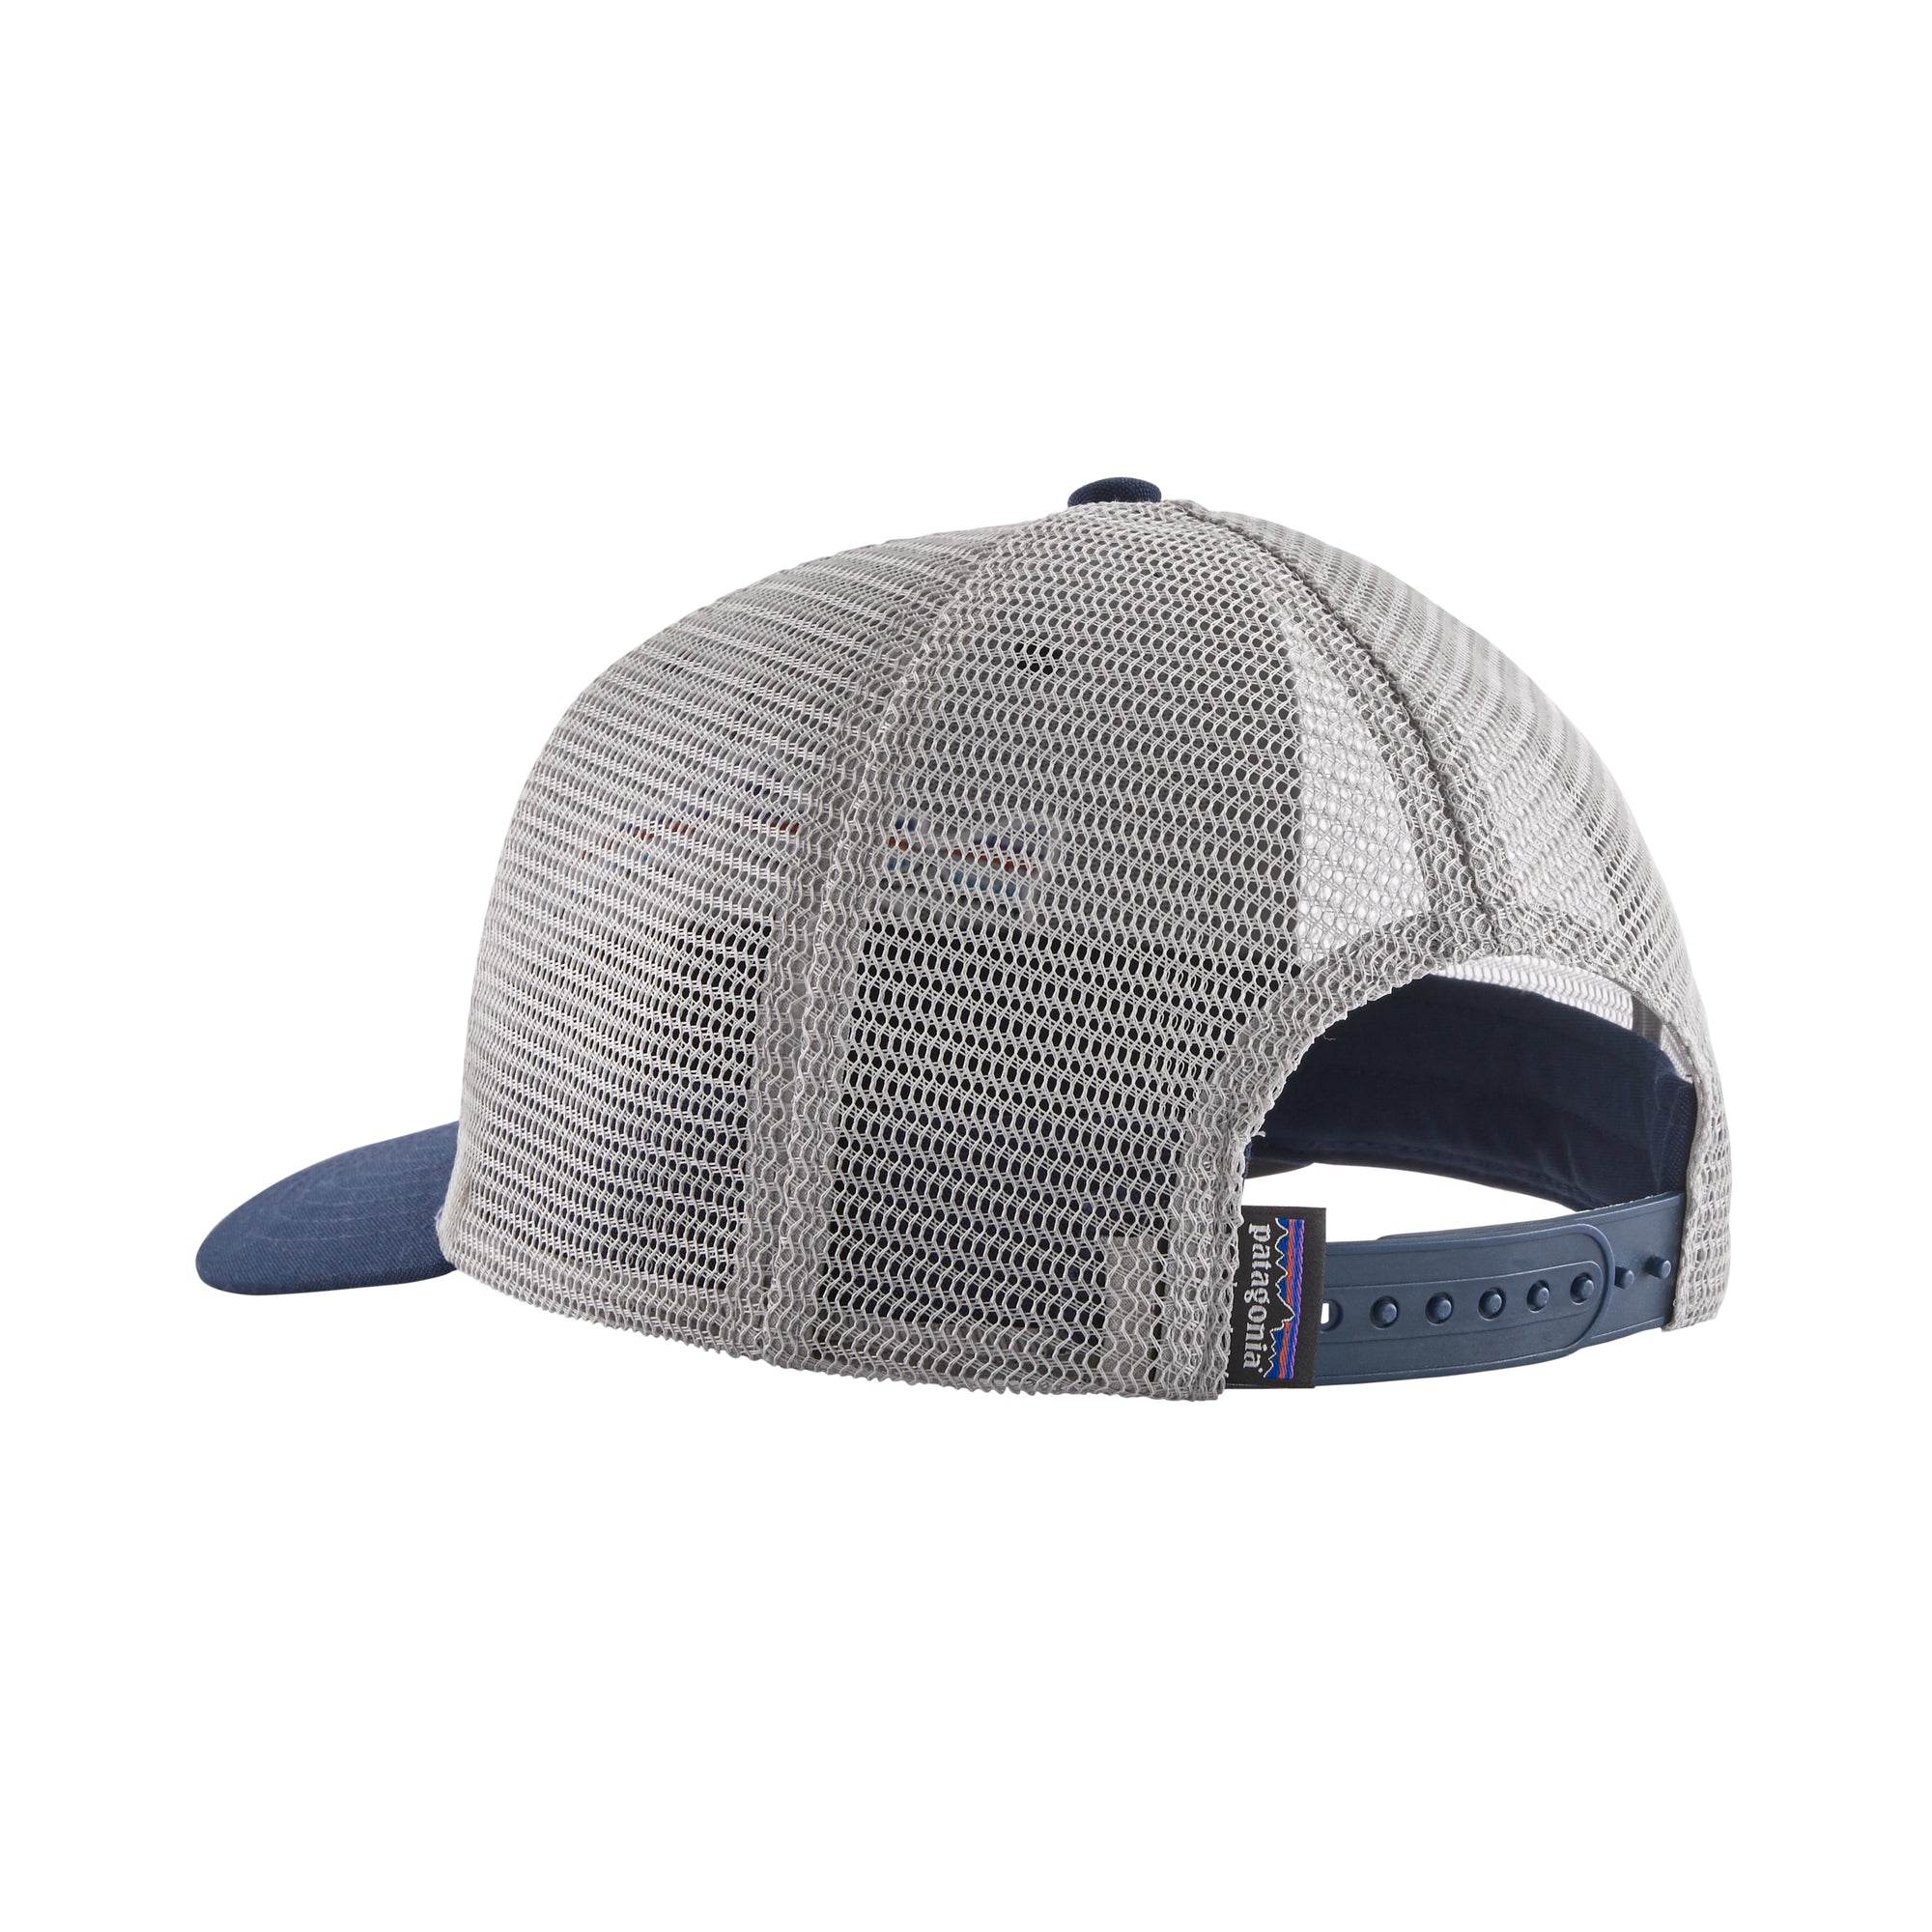 Patagonia Fitz Roy Trout Trucker Hat - Classic Navy - Iron Bow Fly